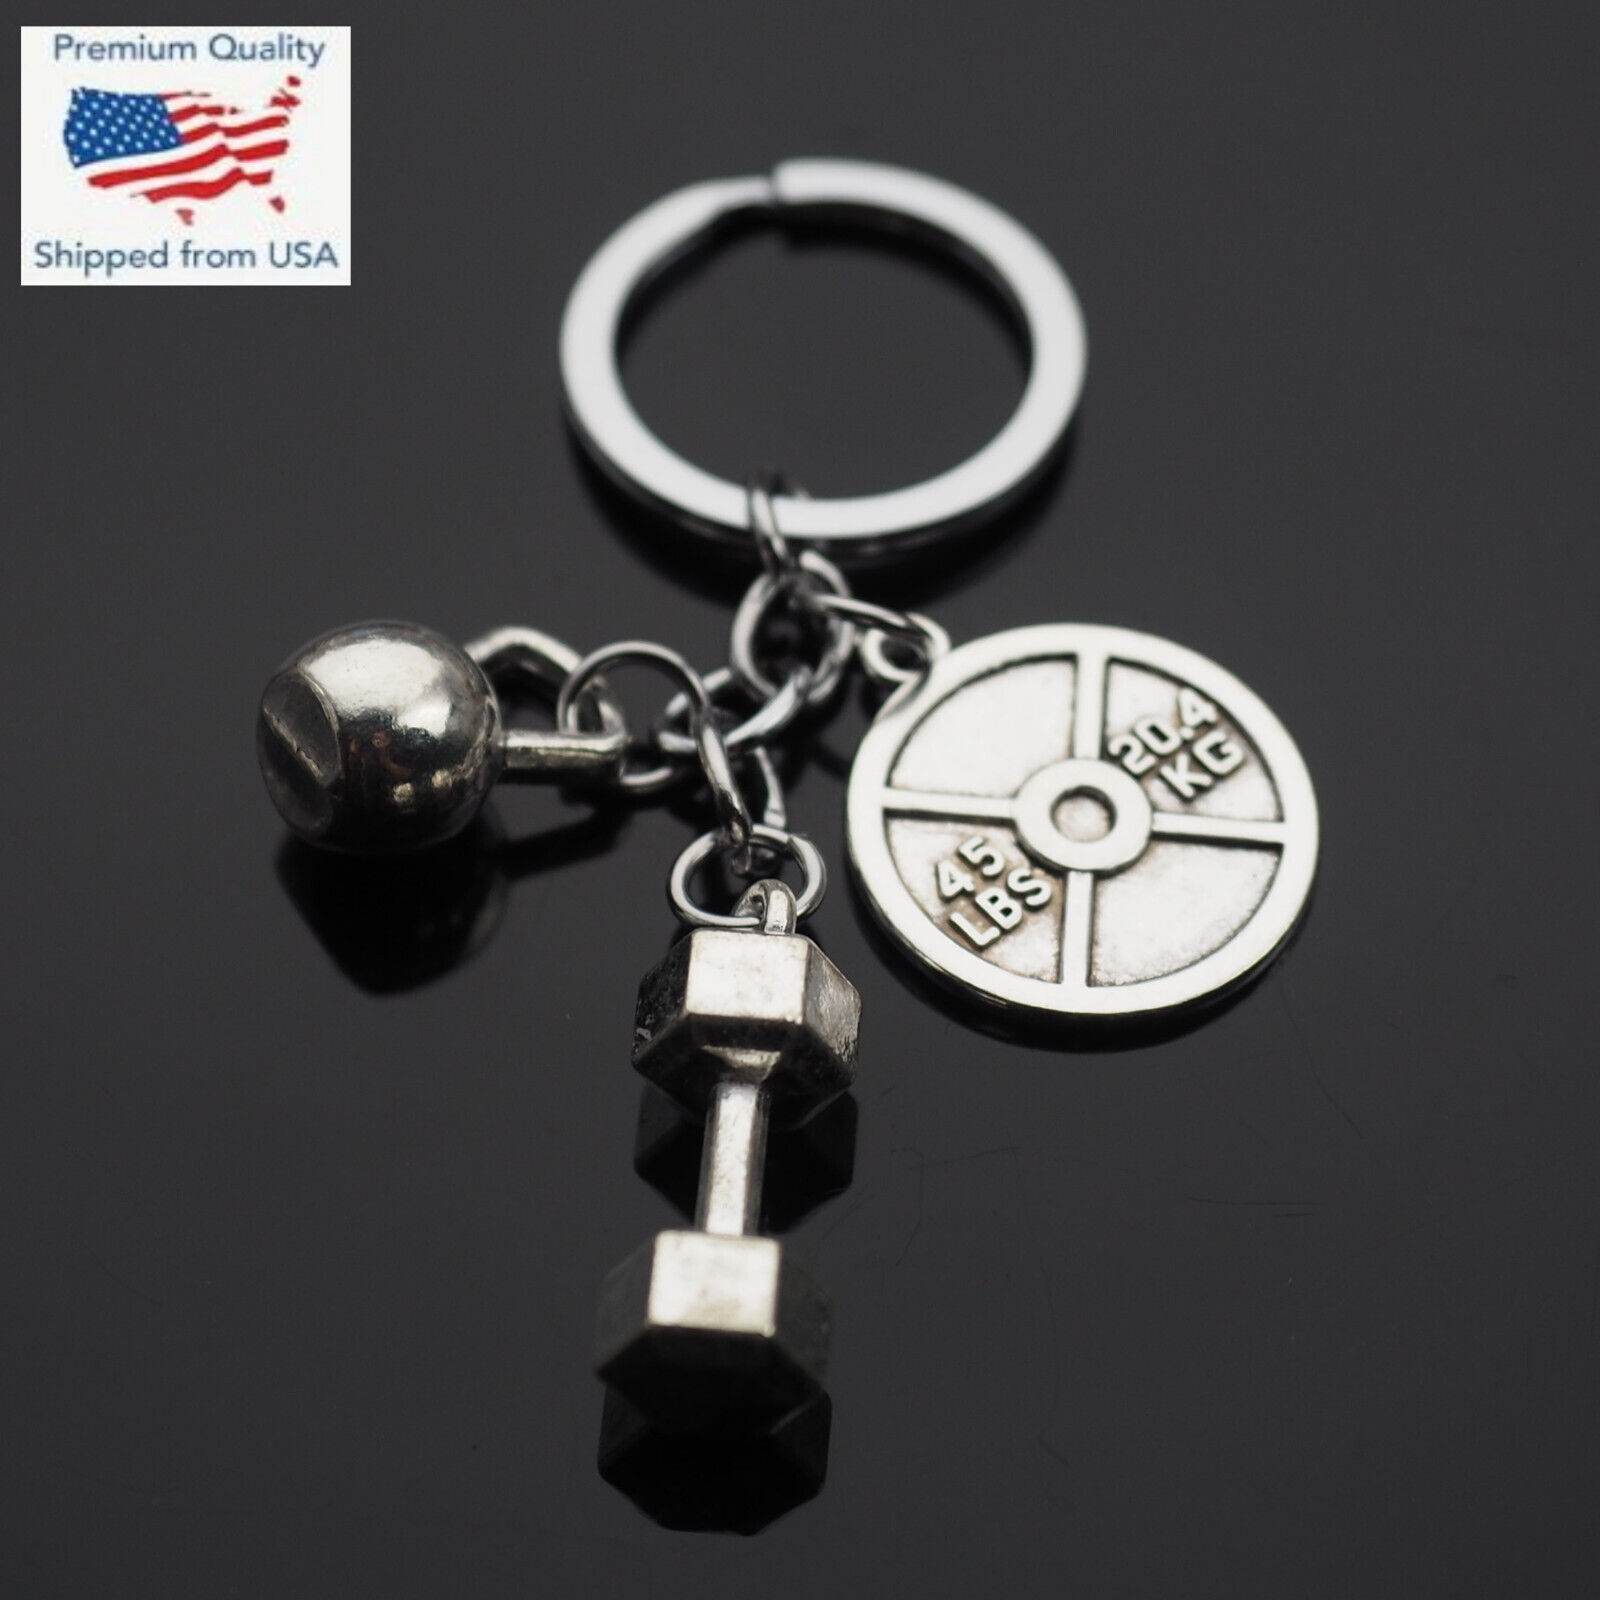 Dumbbell 45lbs 20.4 KG Weight Lifting Gym Pendant Keychain Key Chain Muscle Gift